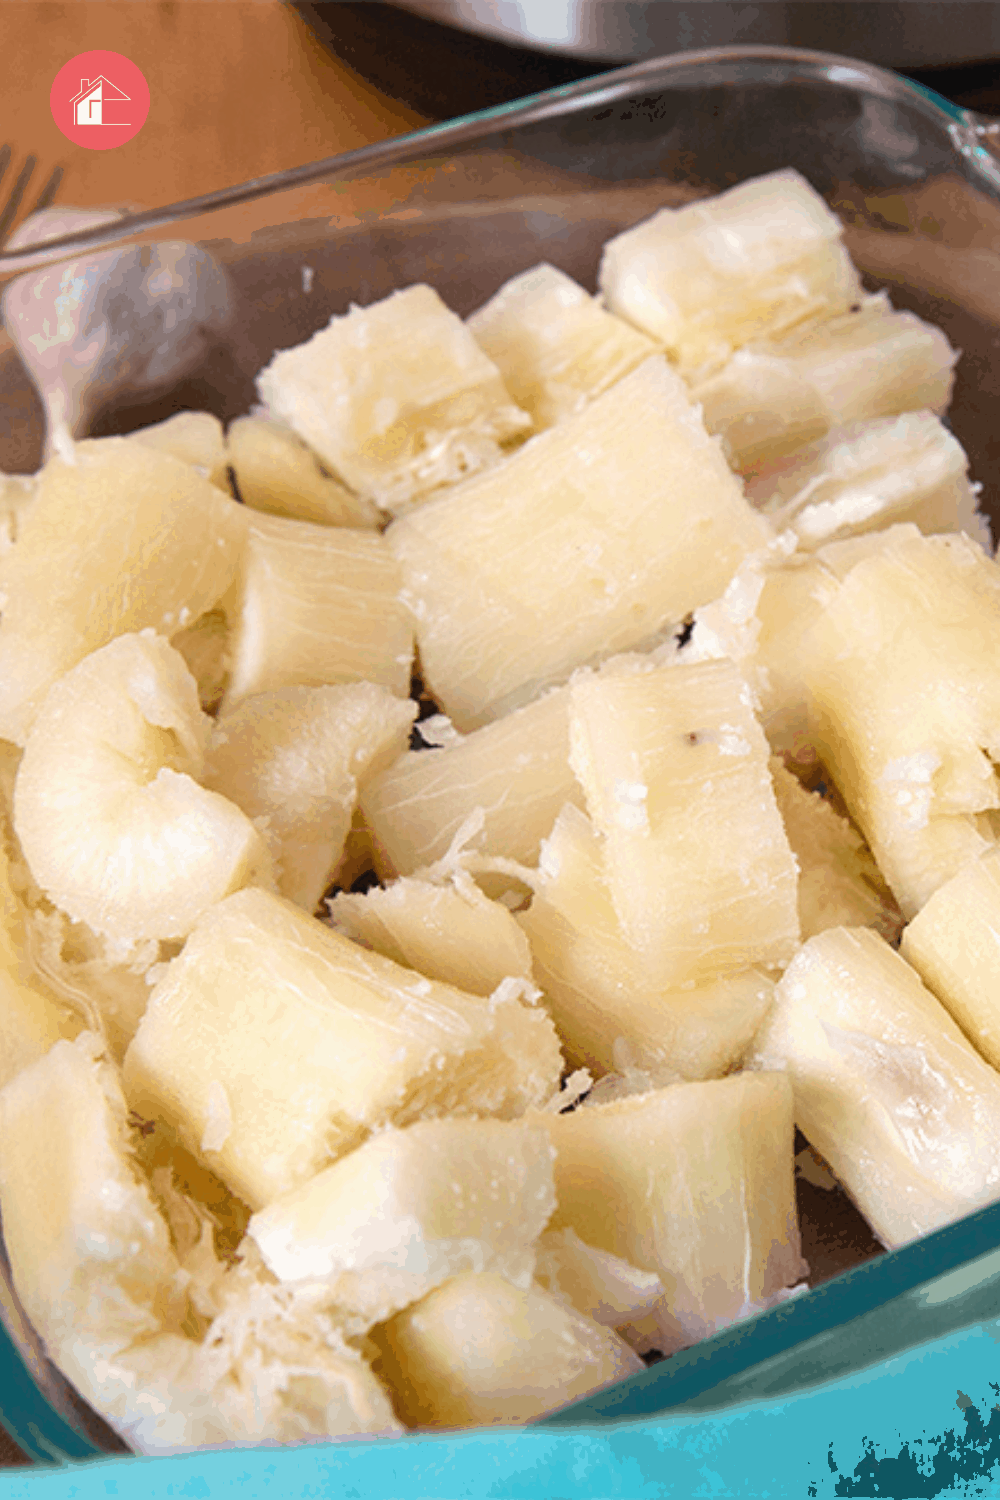 Cooking yuca has never been easy now that we got the Instant Pot. If you enjoy yuca as I do, I’ll show you how to cook yuca using an instant pot. via @mystayathome